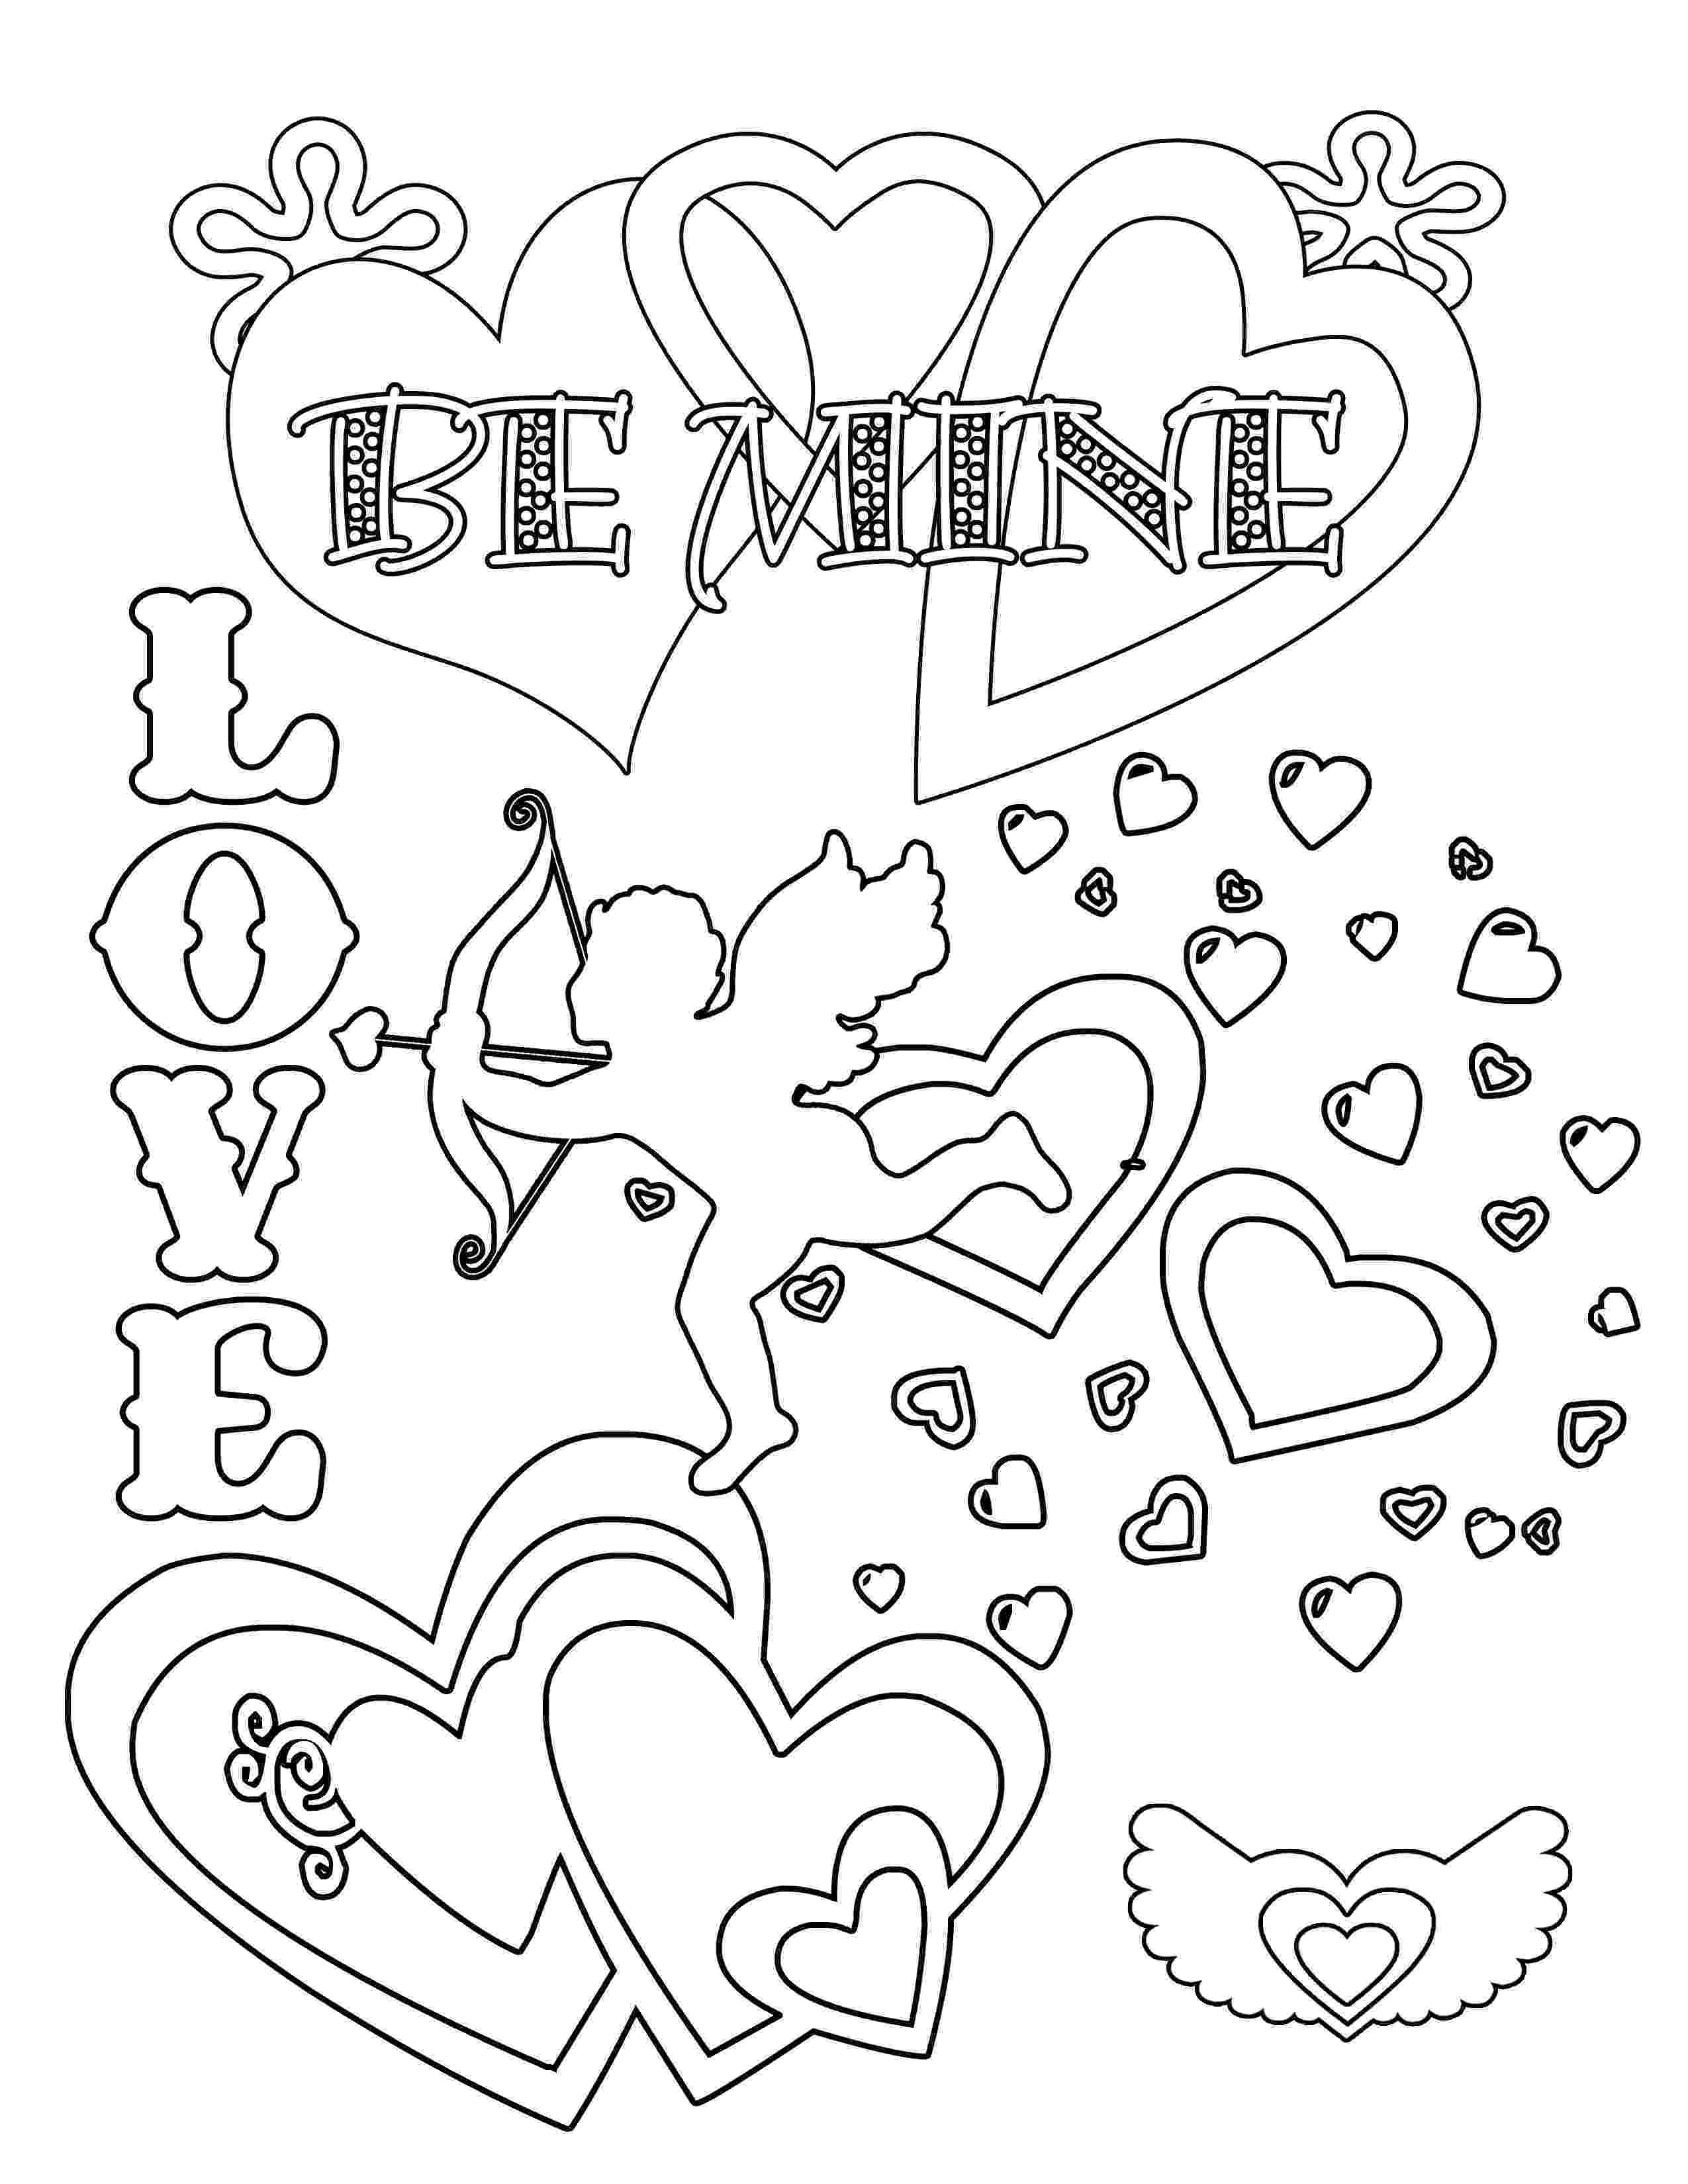 printable colouring valentines cards free printable valentines day cards best coloring pages for kids printable cards valentines free colouring 